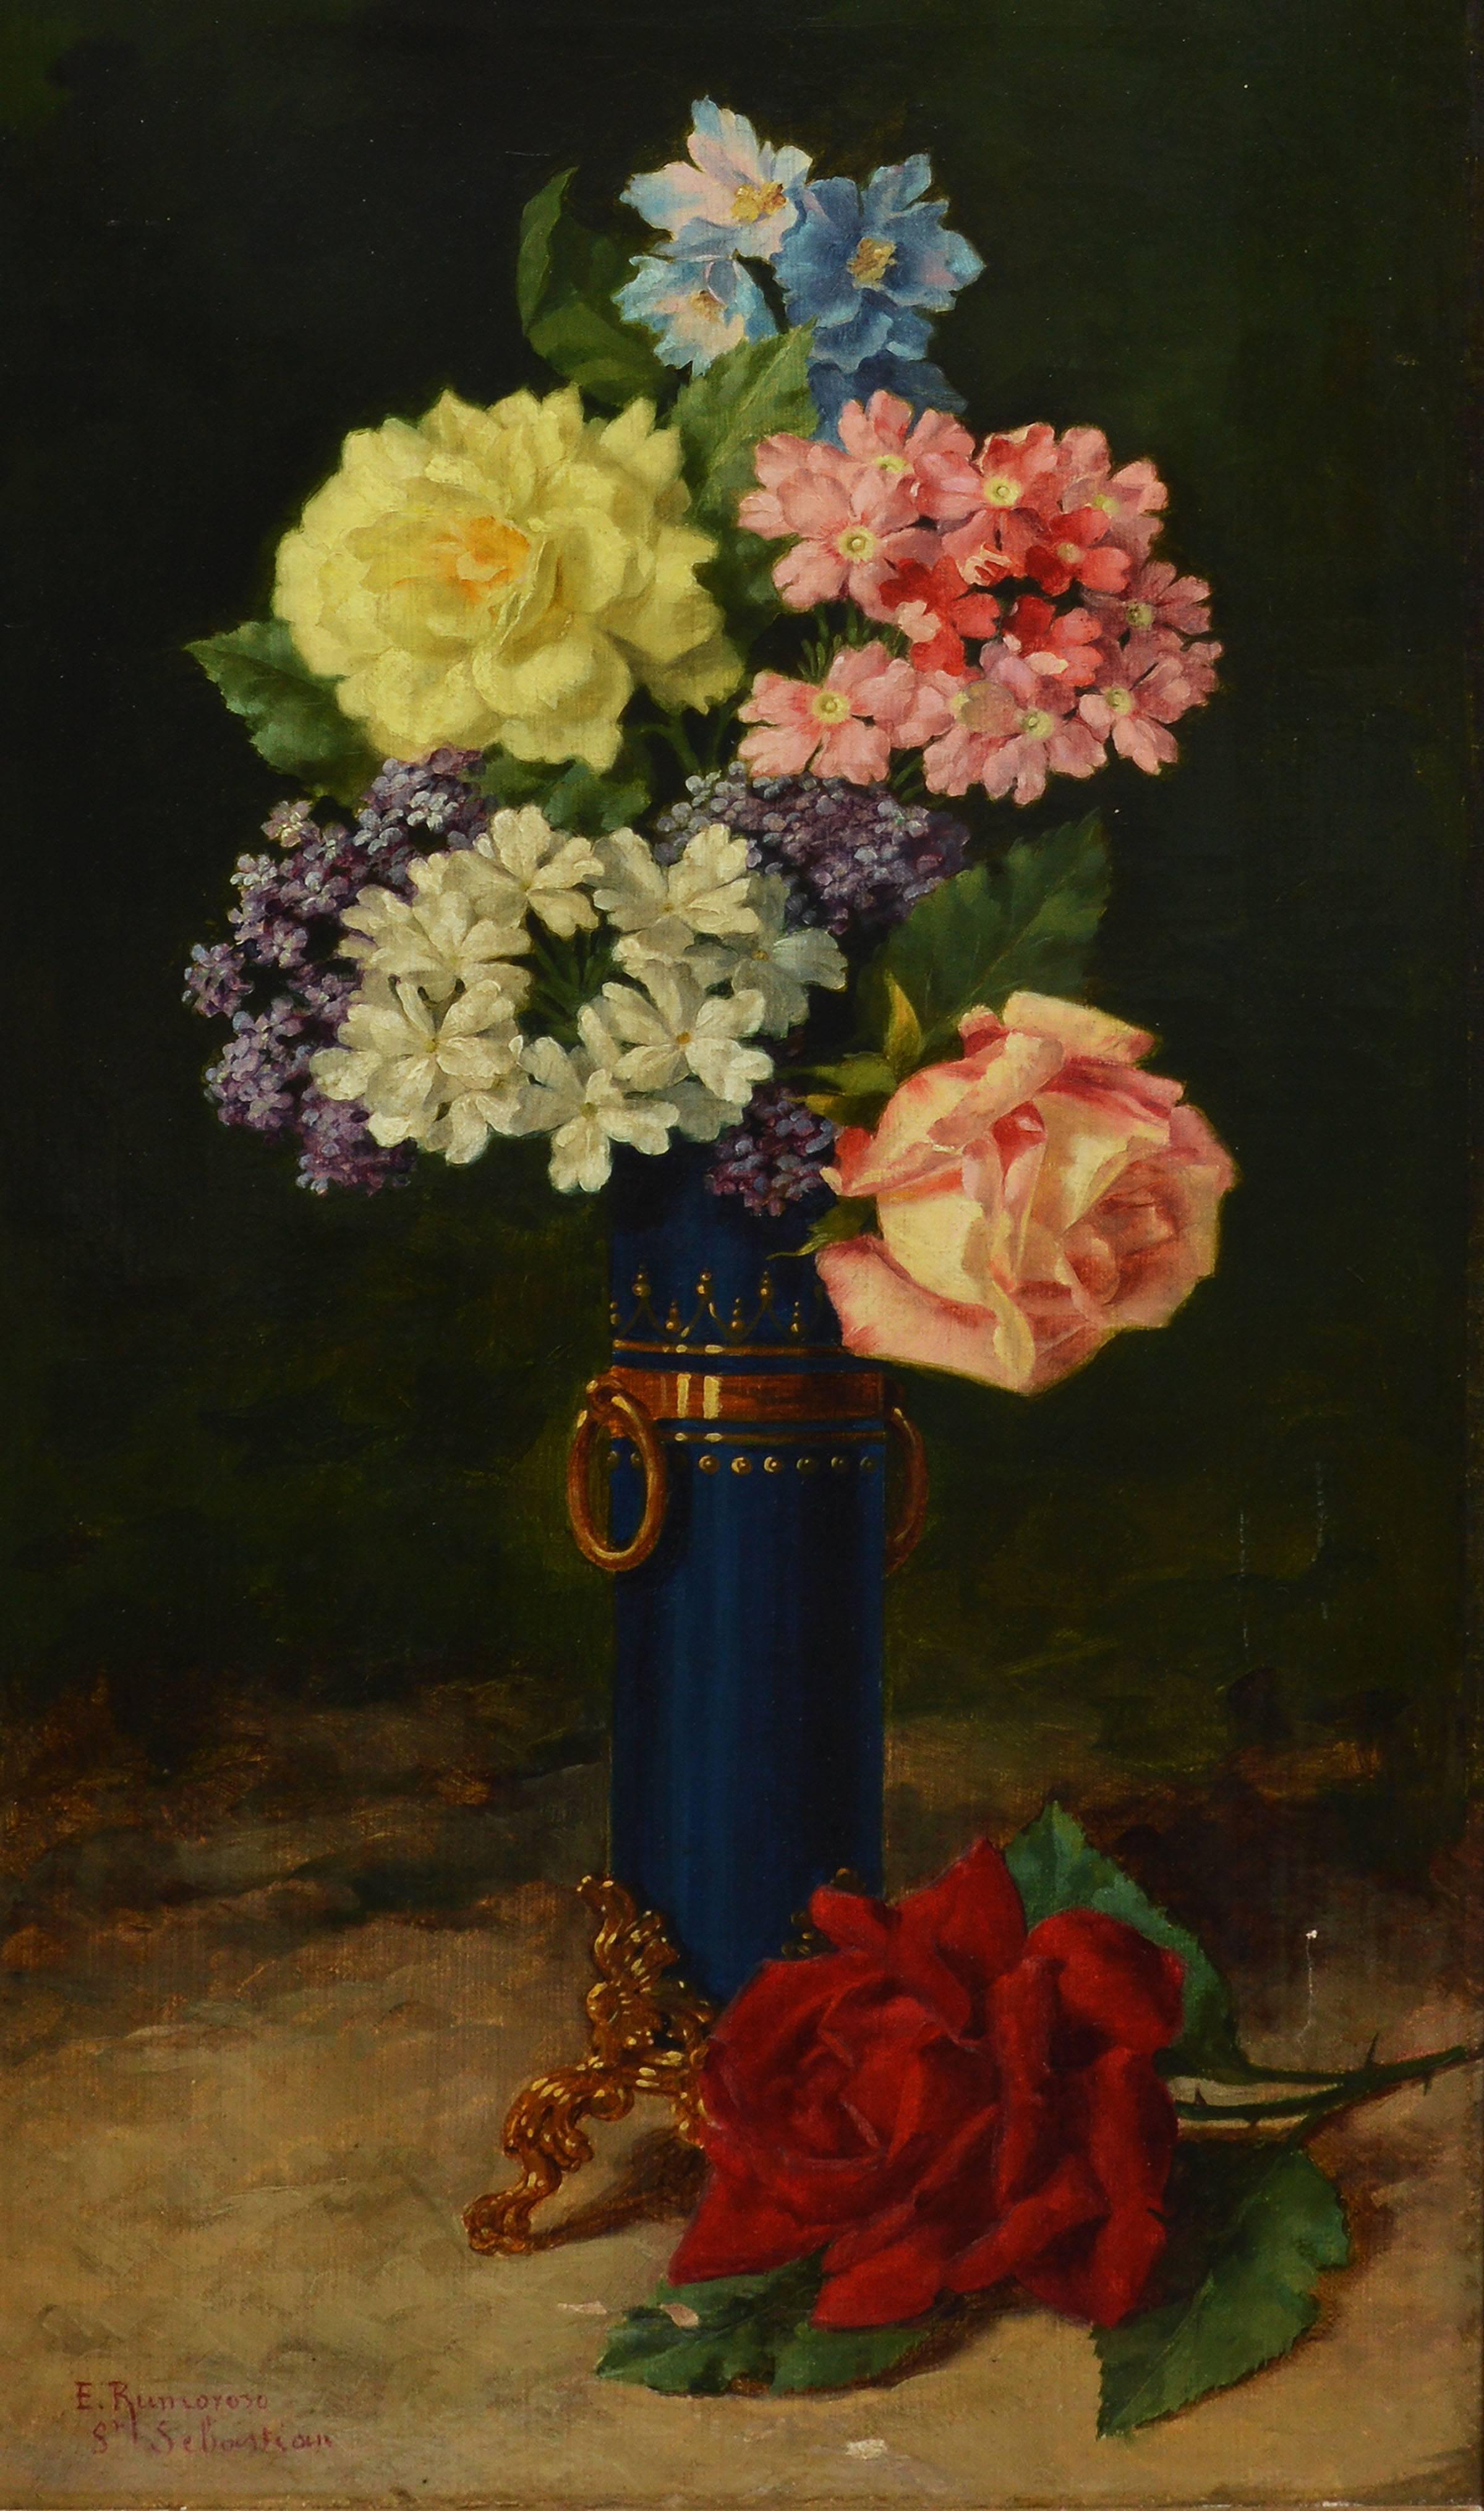 Antique Spanish Floral Still Life - Realist Painting by Enrique Rumoroso y Valdes